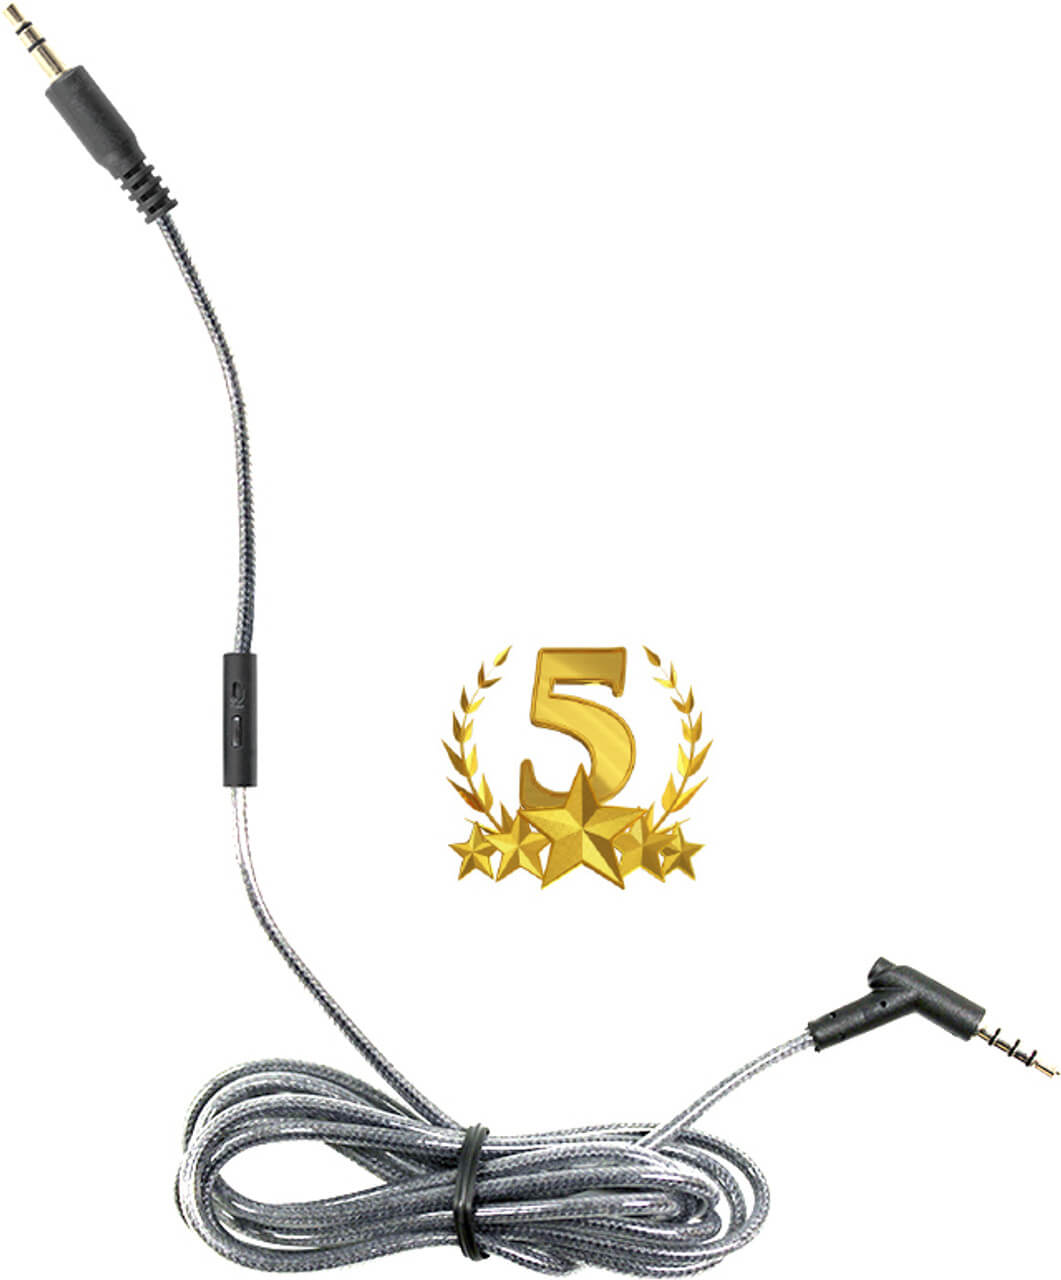 HamiltonBuhl Deluxe Active Noise-Cancelling Cord – Converts Headphone into a Headset